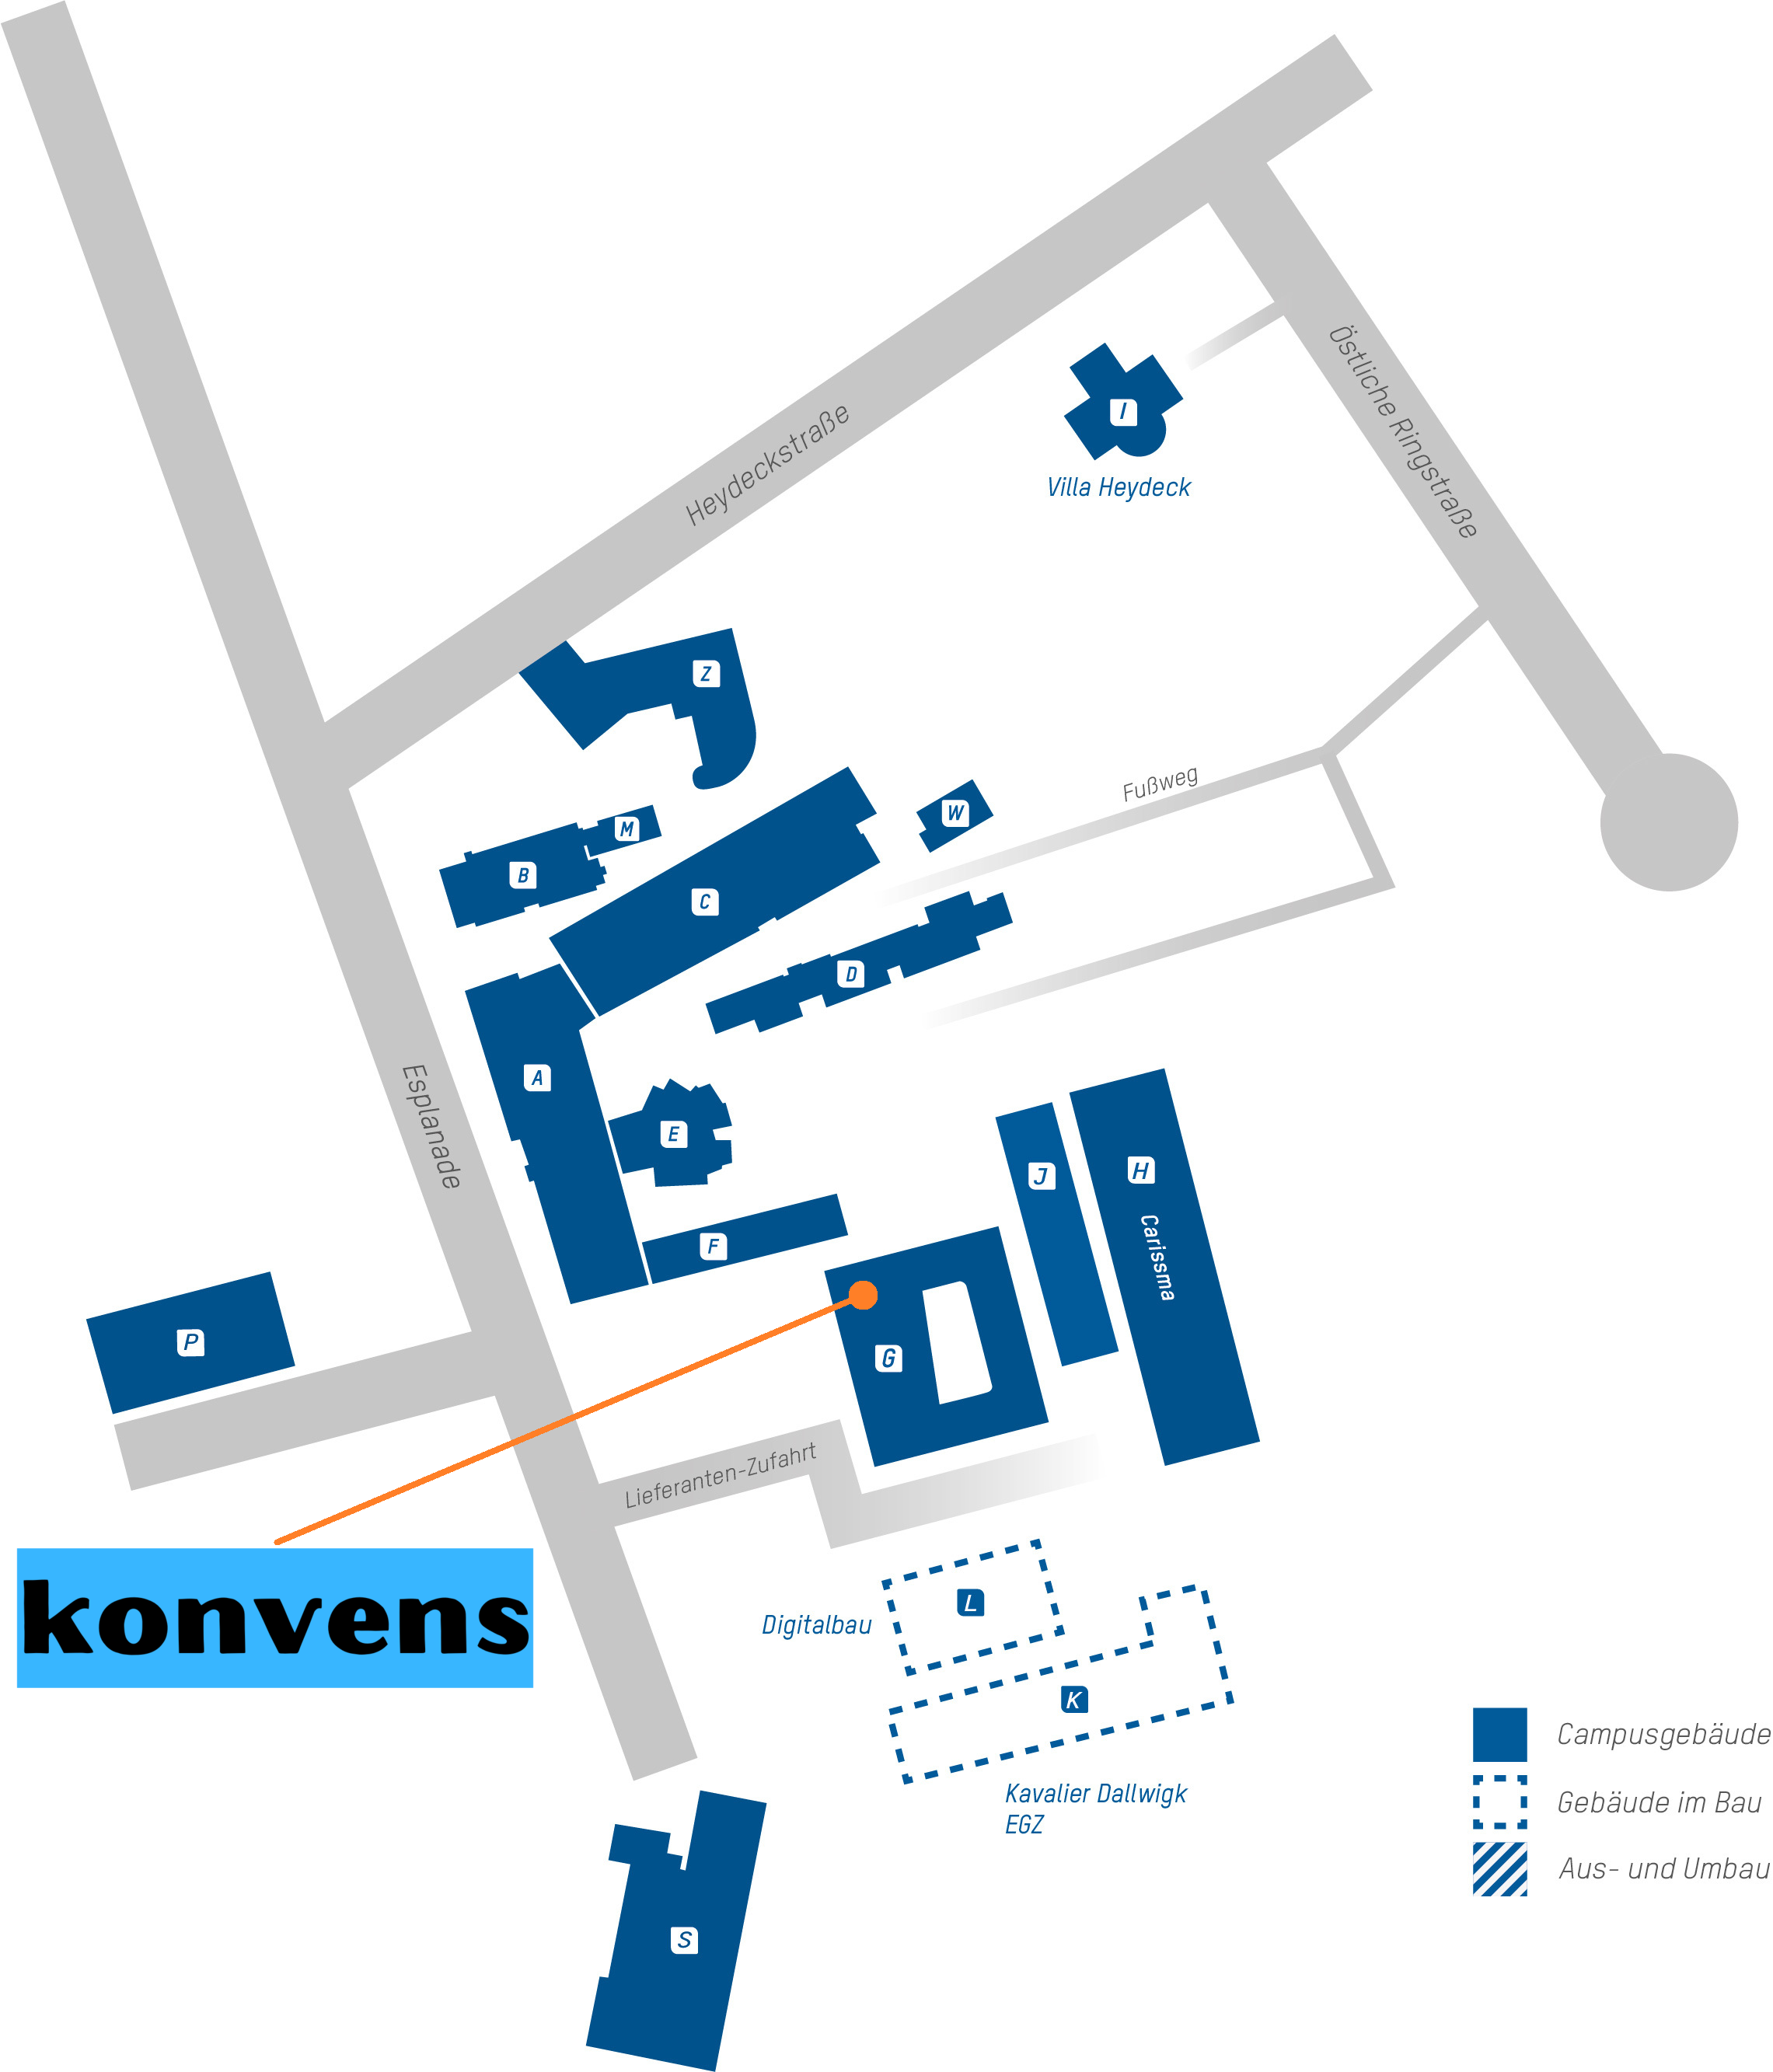 THI campus map with konvens location